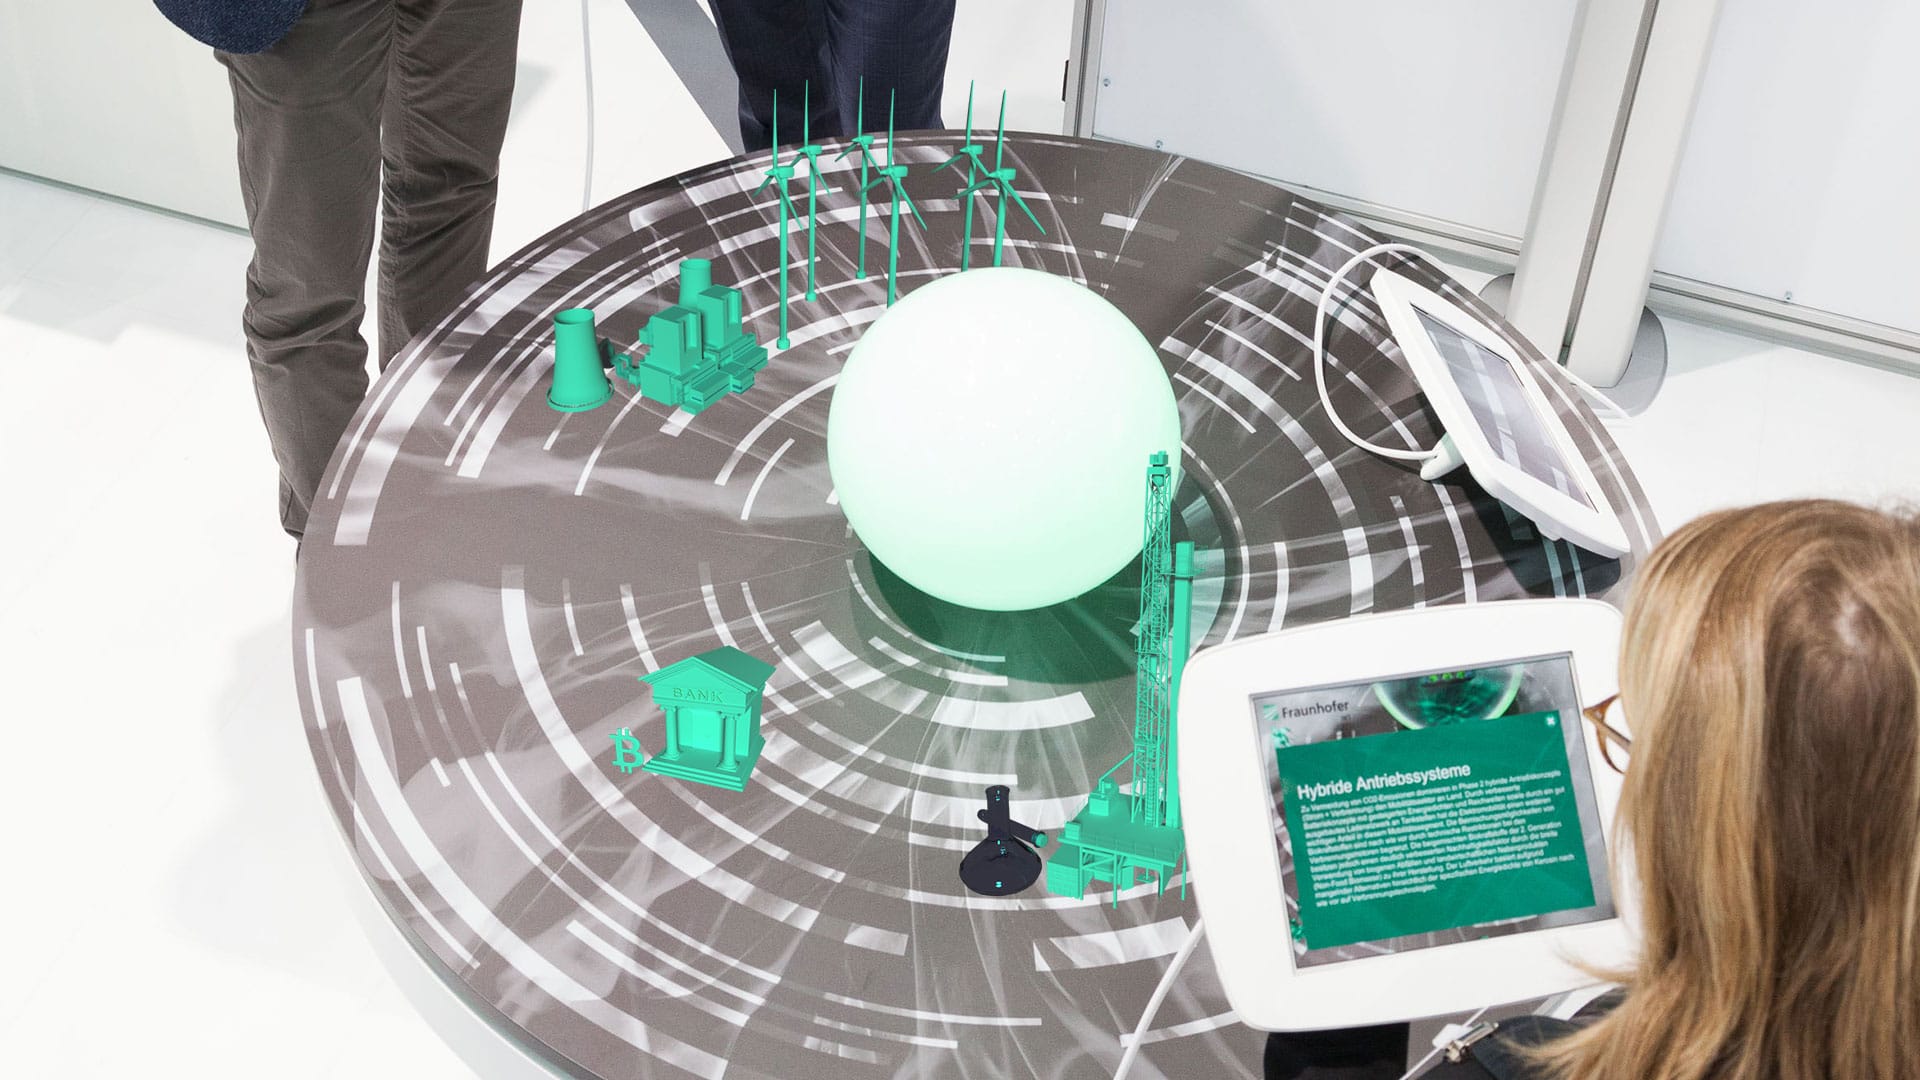 Fraunhofer Institut – Augmented Reality Exponat